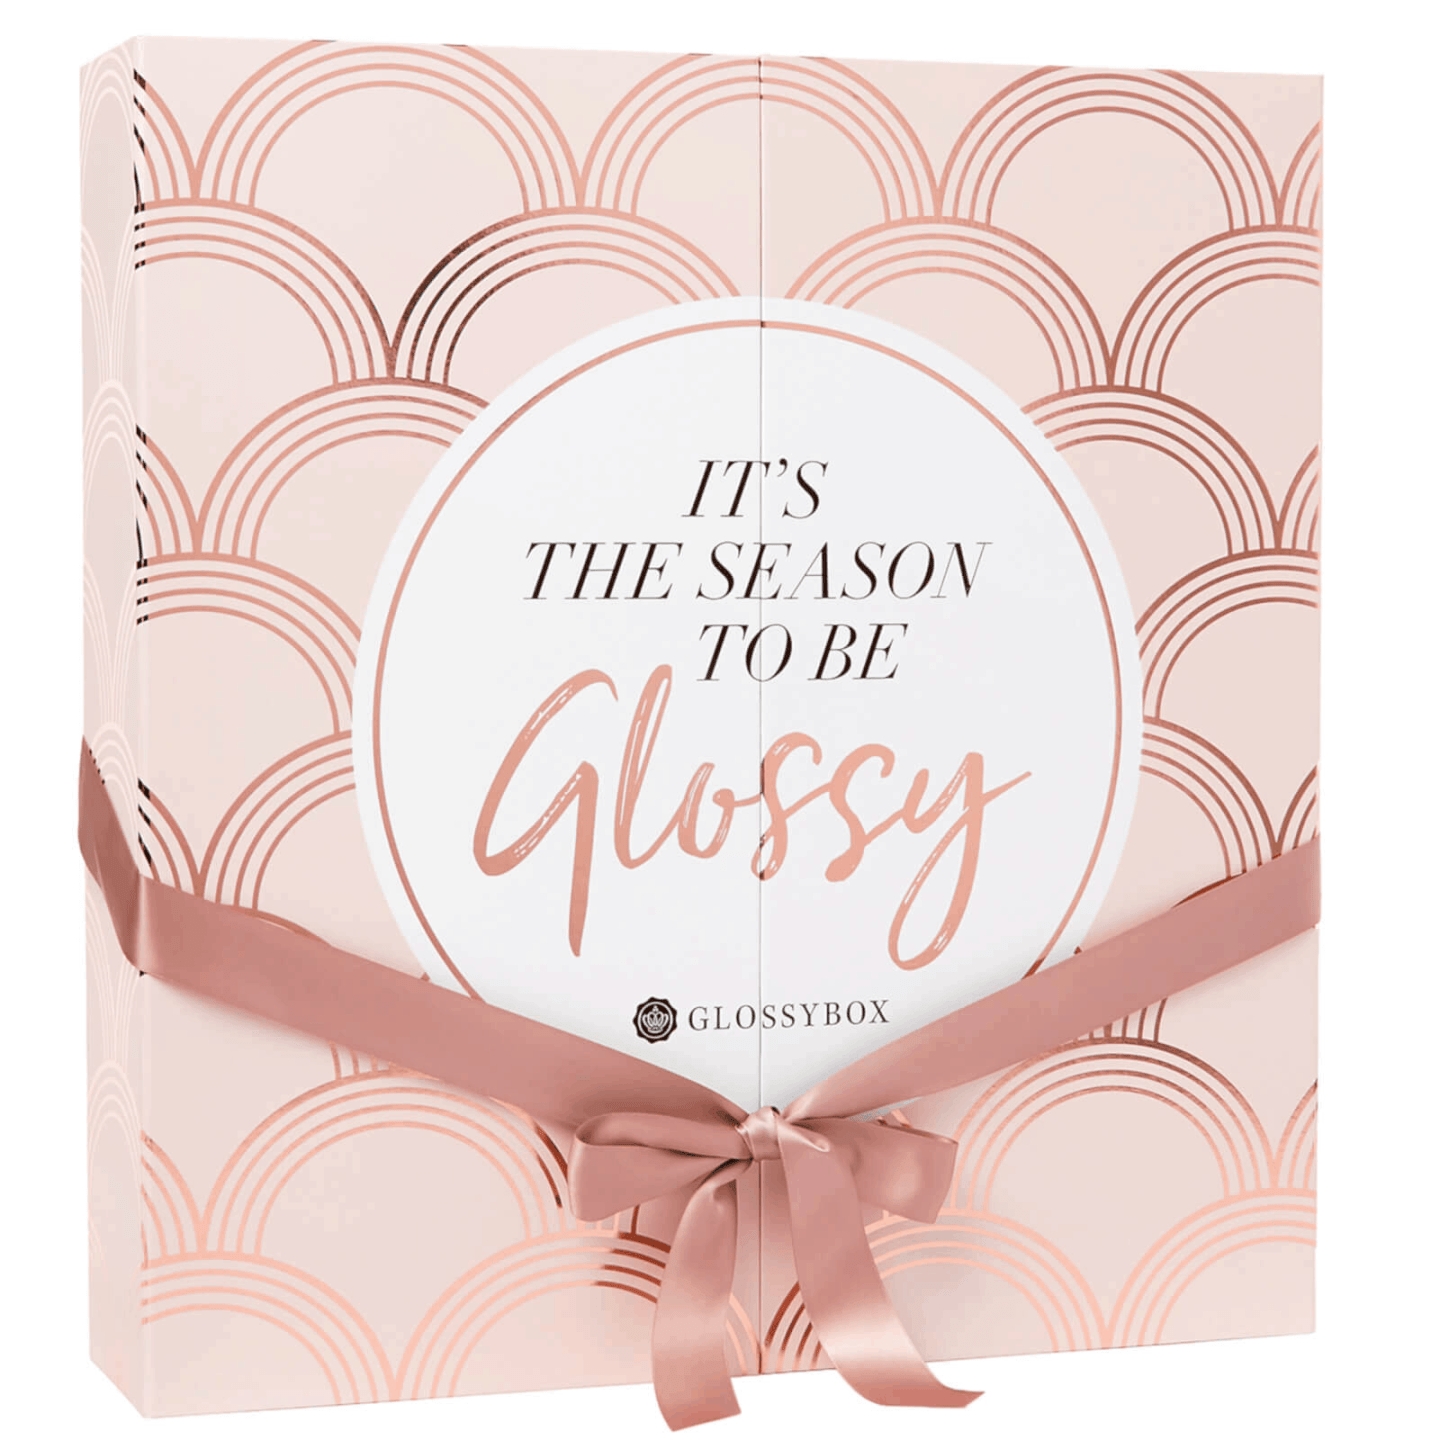 2019 GLOSSYBOX Advent Calendar Available Now   Full Spoilers Hello